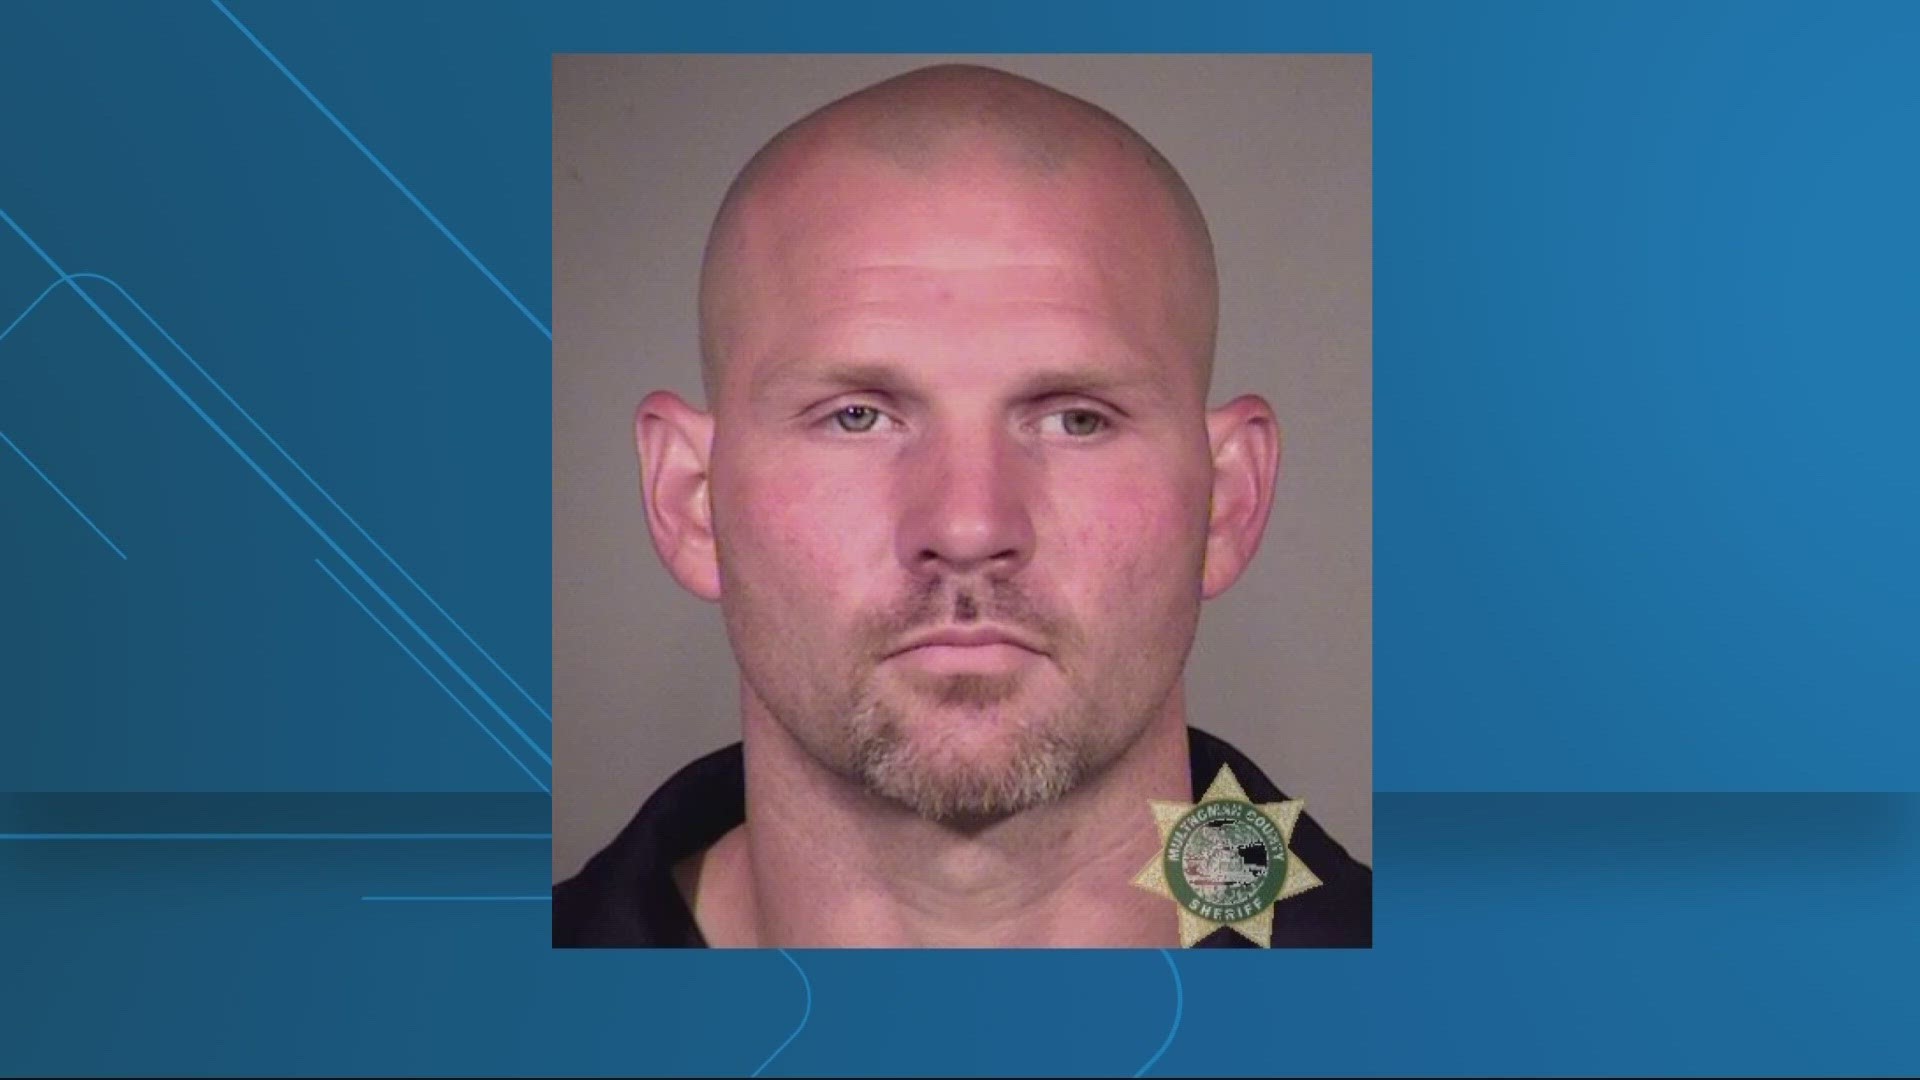 Daniel Warren allegedly attacked Darell Preston while shouting racial slurs. He has not yet been charged under Oregon’s hate crime laws.